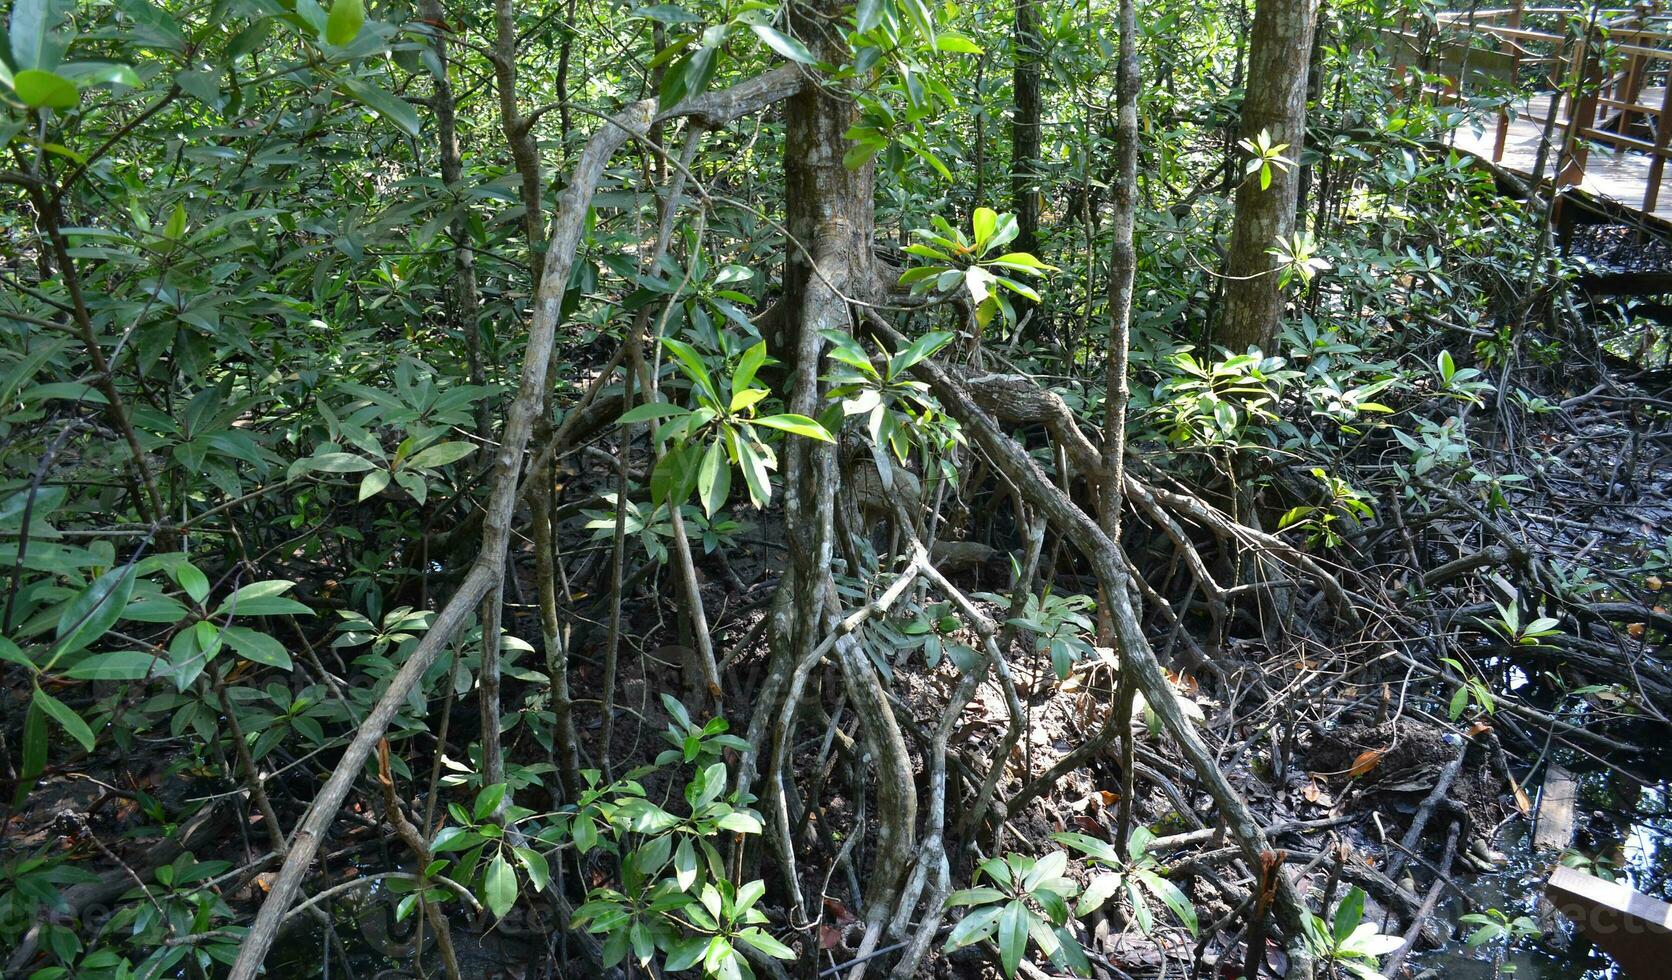 Southeast Asian mangrove swamp forests. Tanjung Piai Malaysia Mangrove Forest Park photo